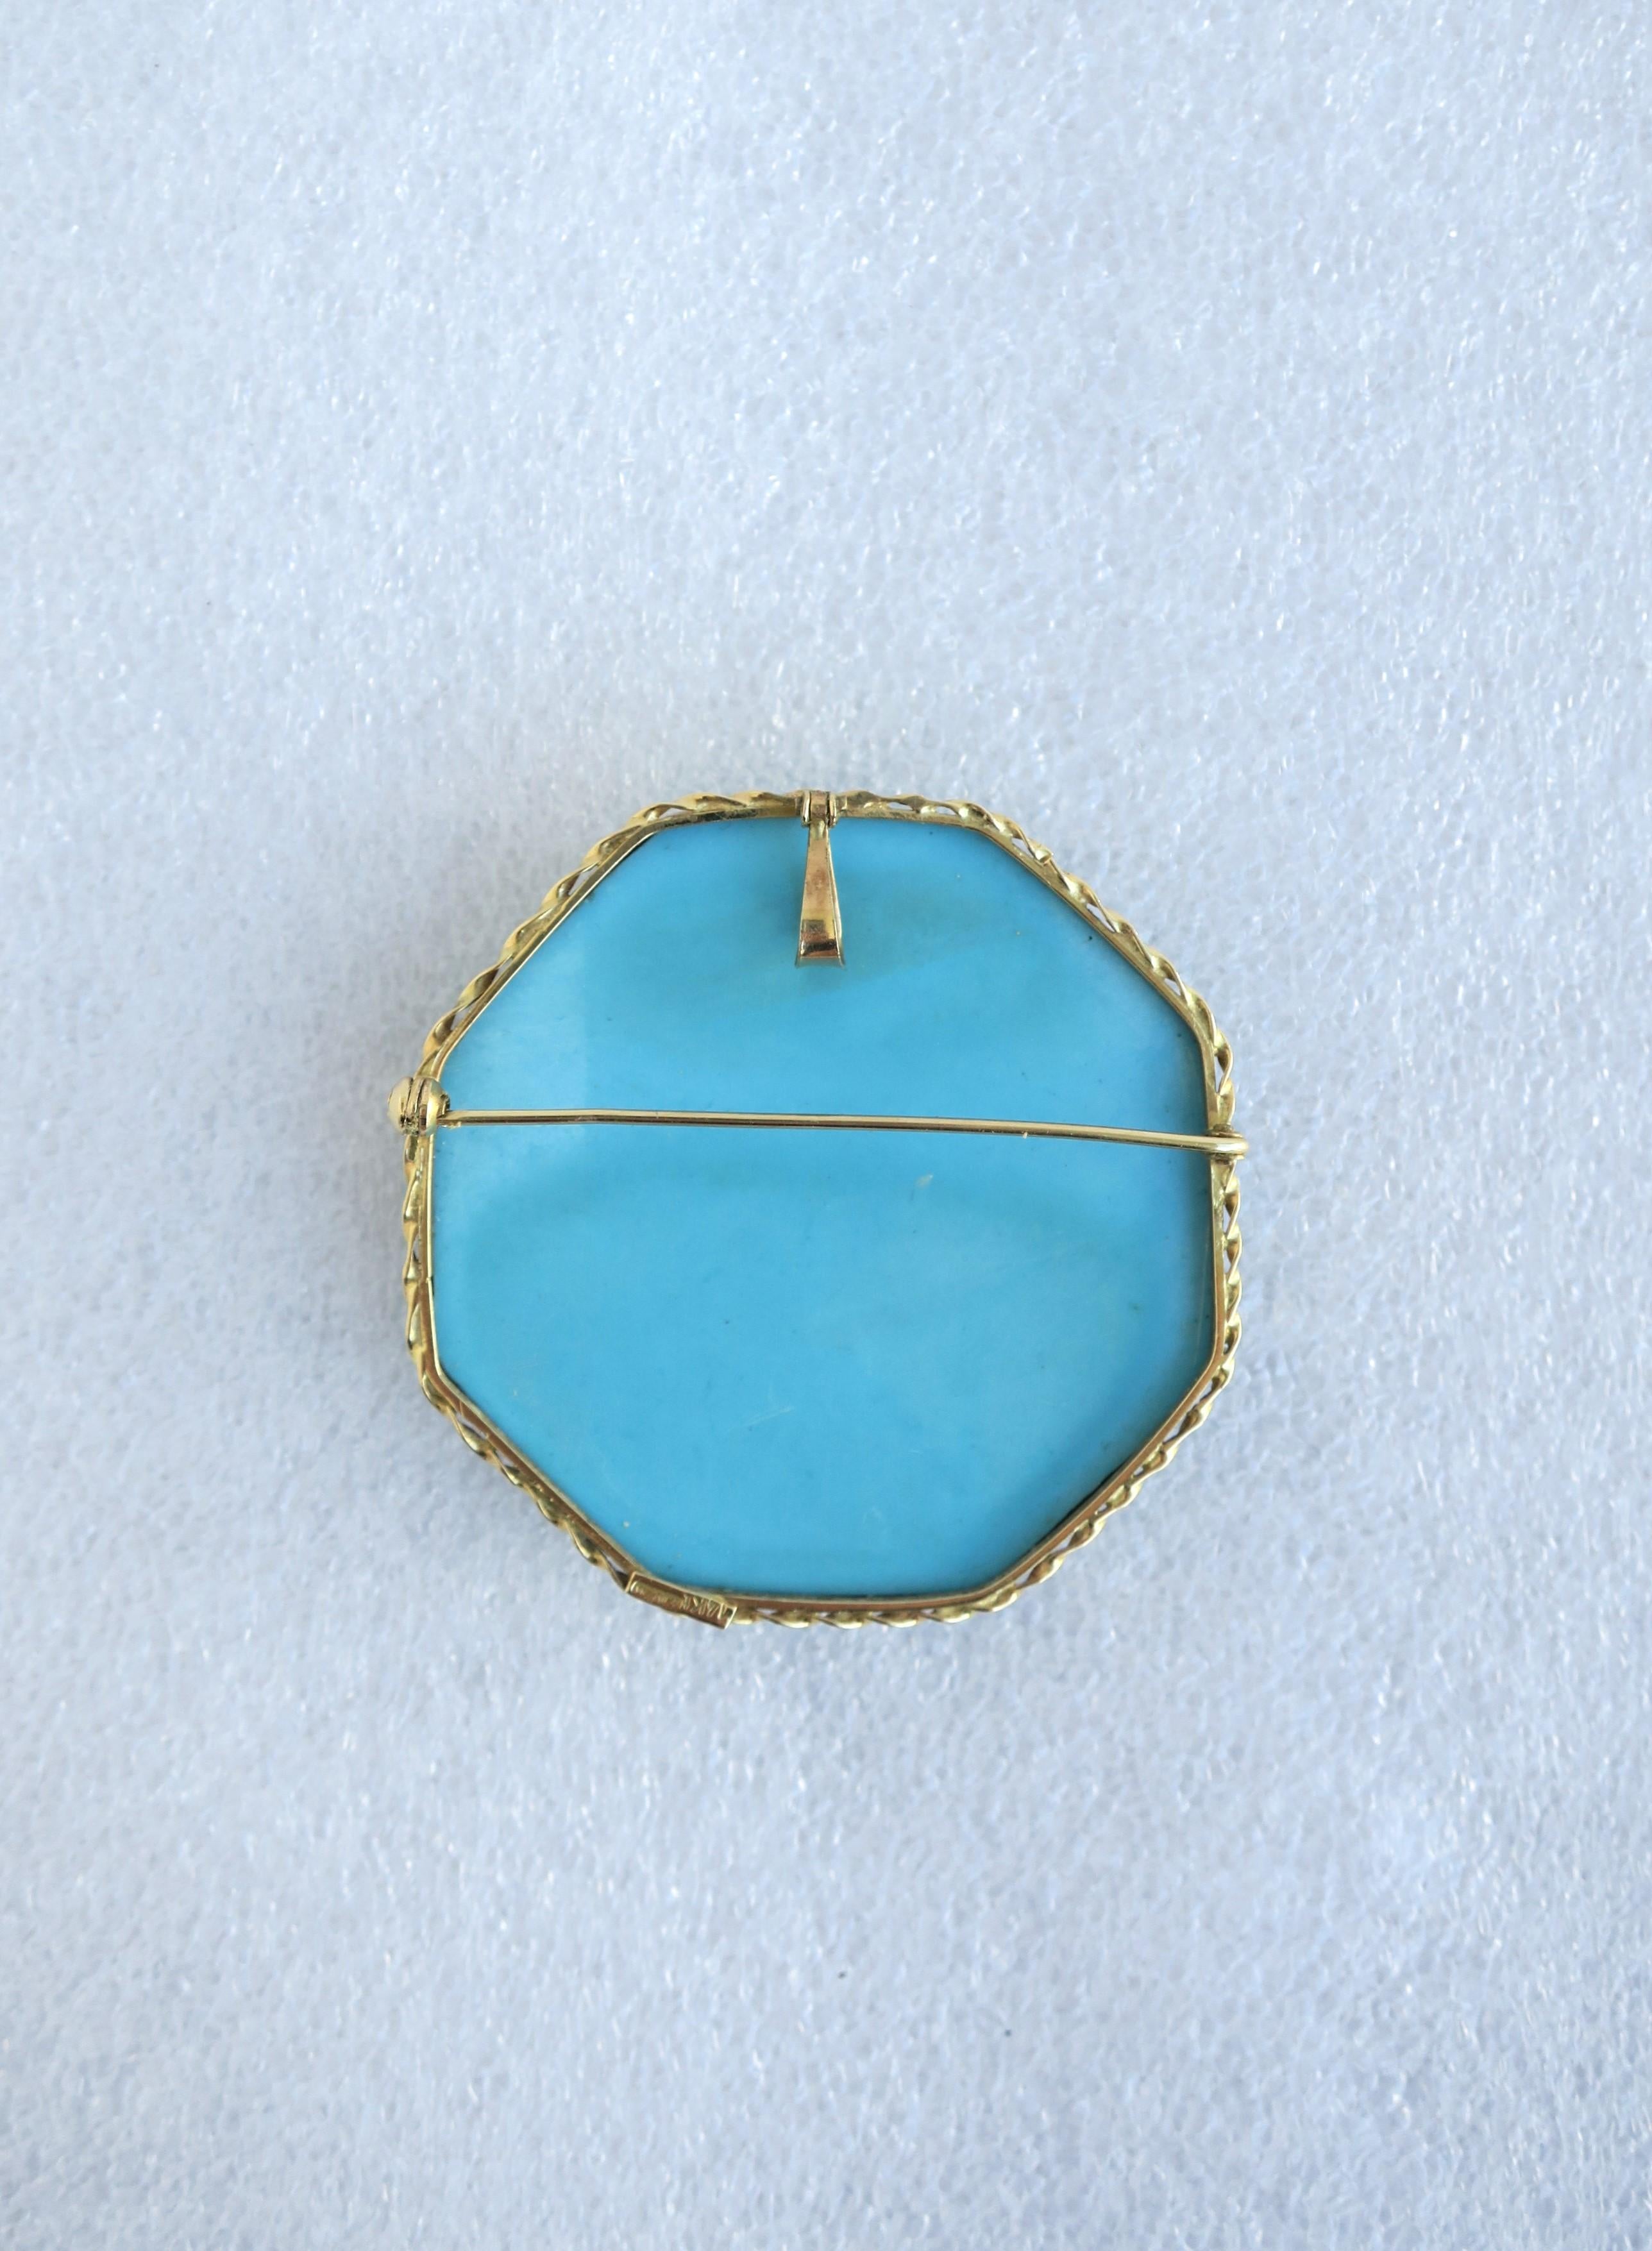 Italian Gold and Turquoise Pendant Necklace and Brooch  For Sale 7